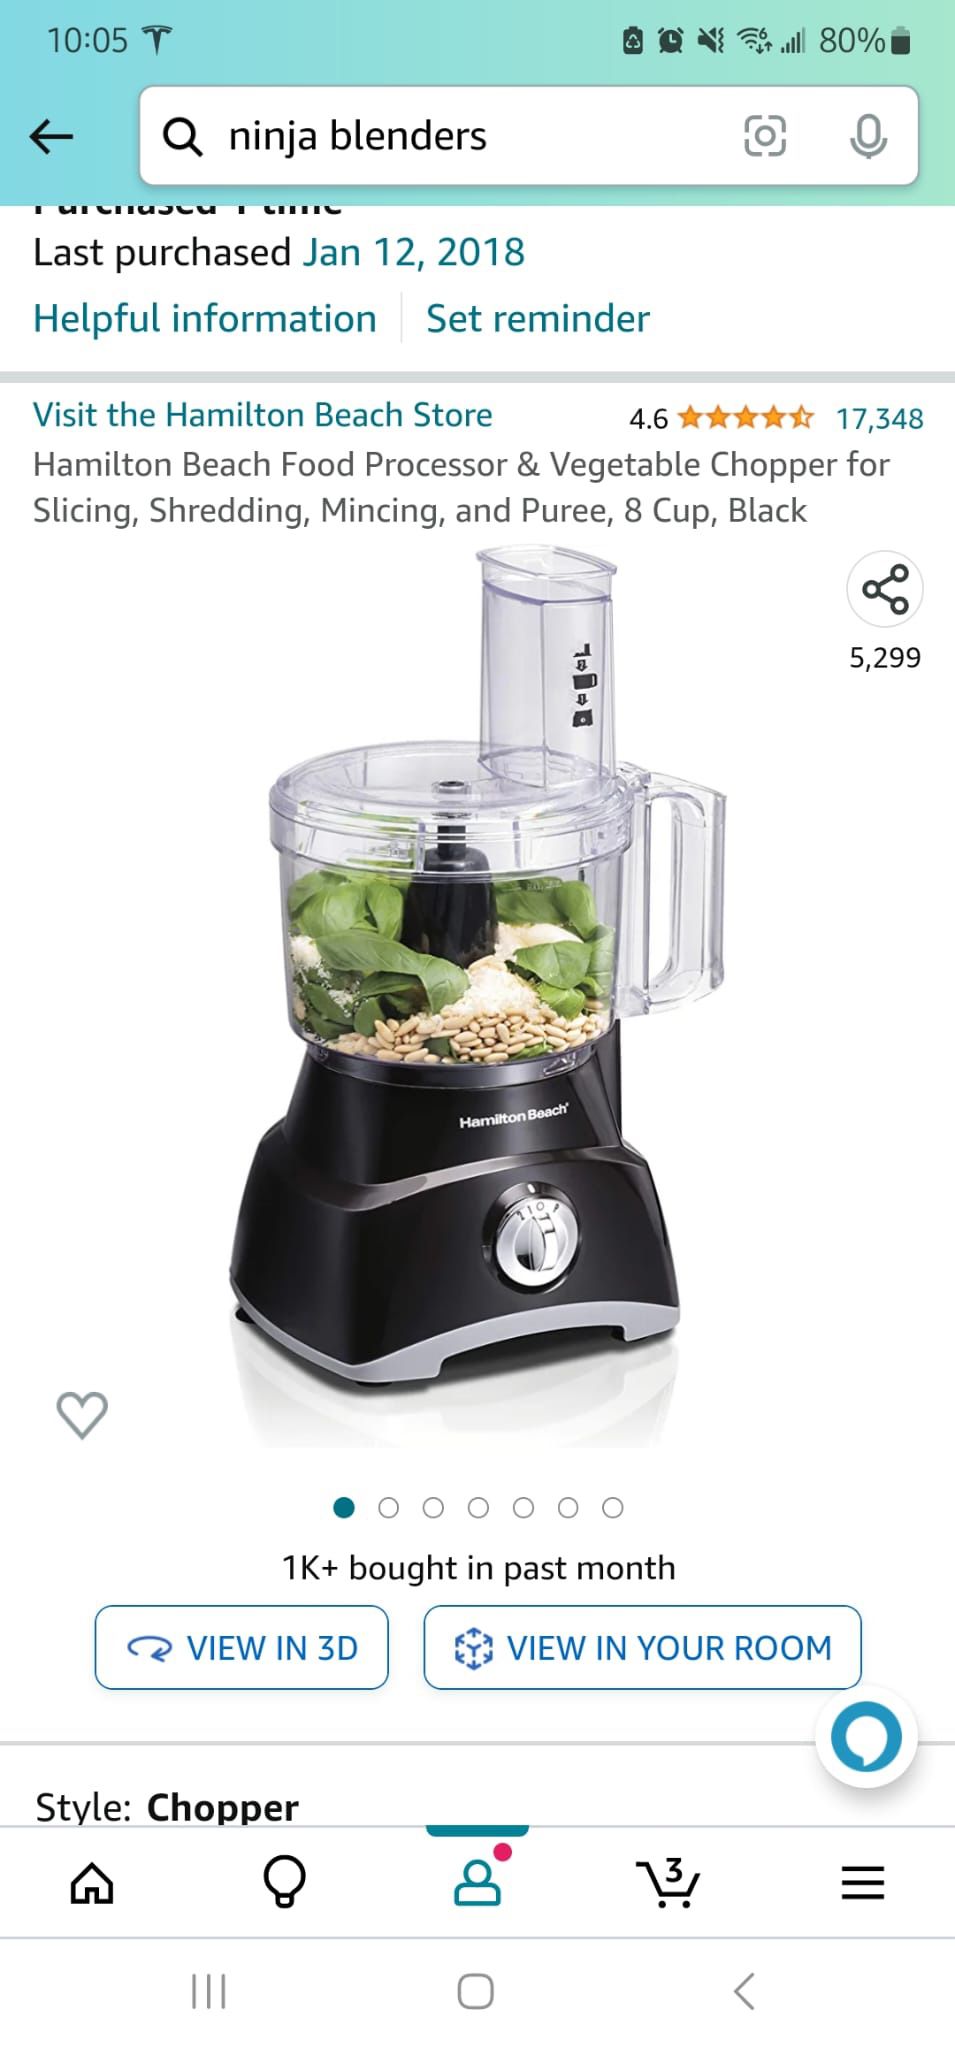 Hamilton Beach Food Processor  Vegetable Chopper for Slicing, Shredding,  Mincing, and Puree, Cup, Black for Sale in West Babylon, NY OfferUp